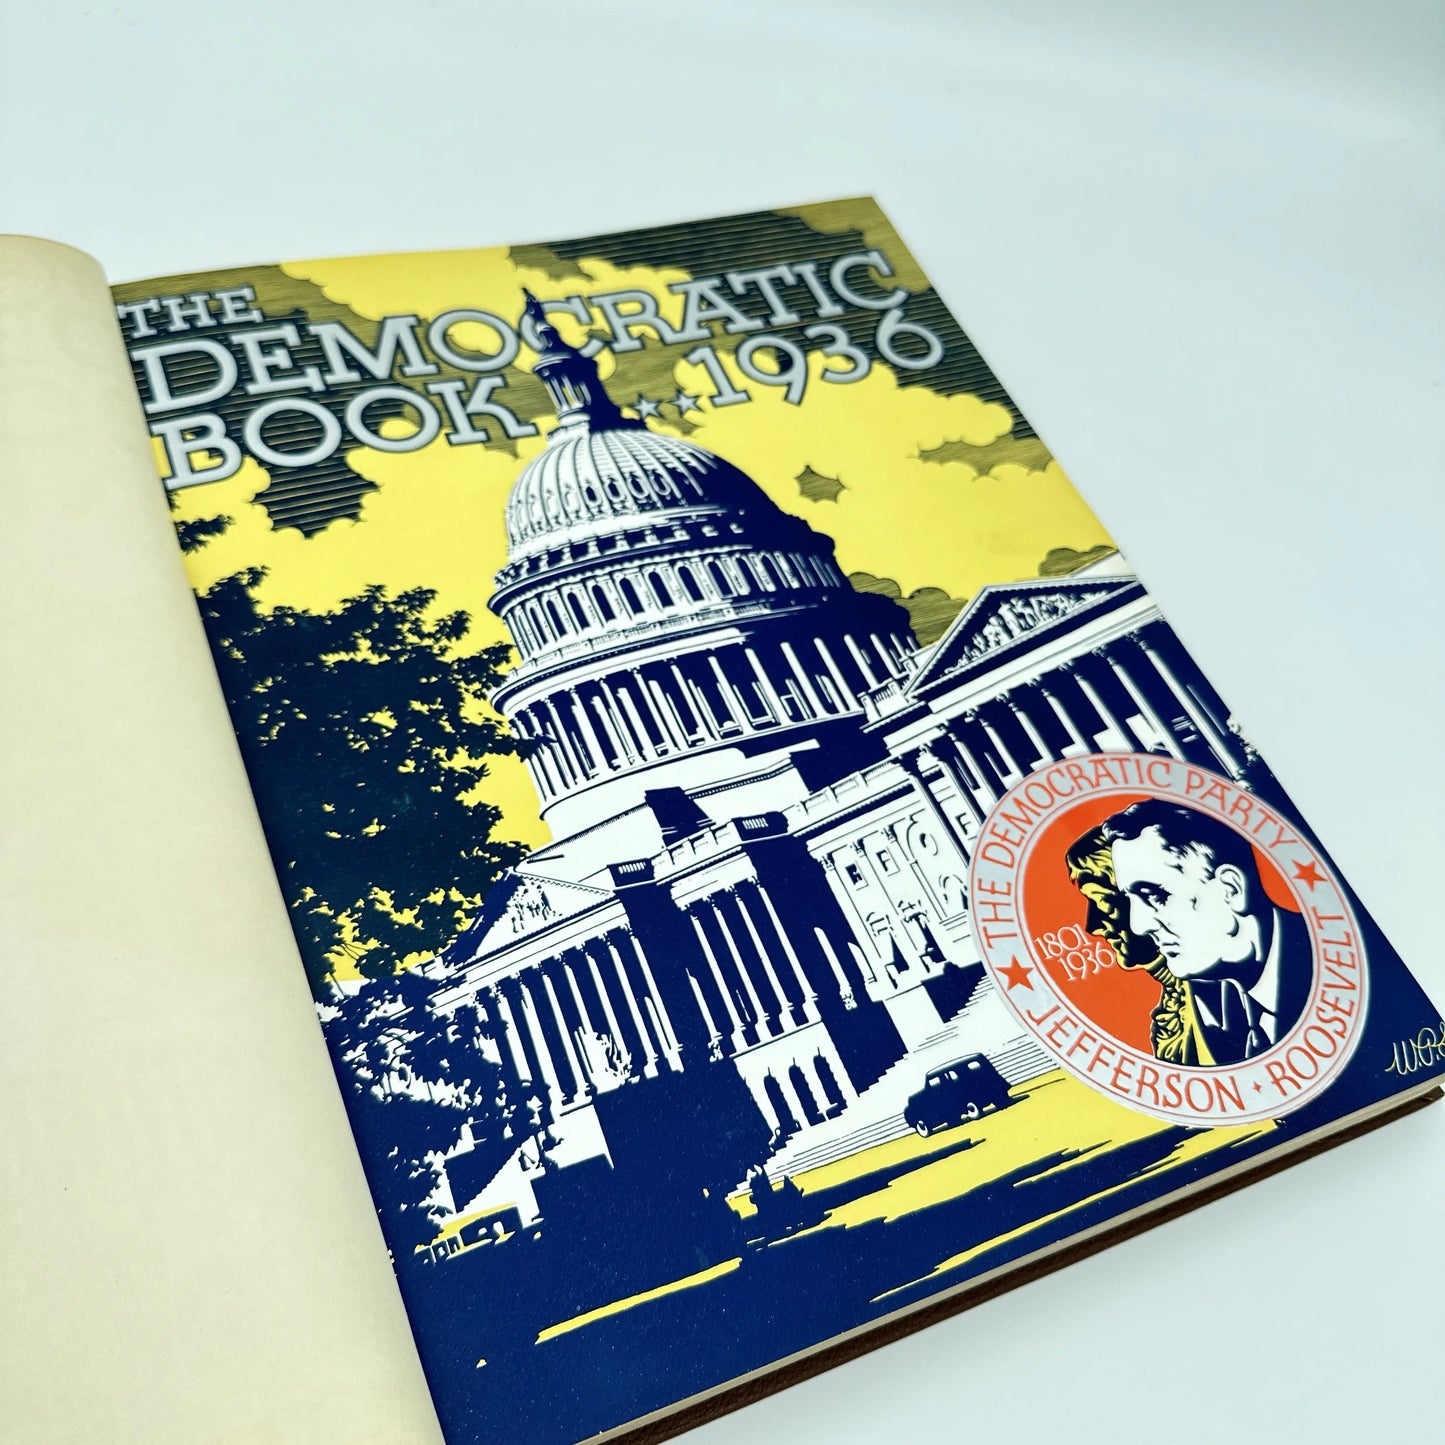 1936 The Democratic Book — Limited first edition signed by Franklin Roosevelt